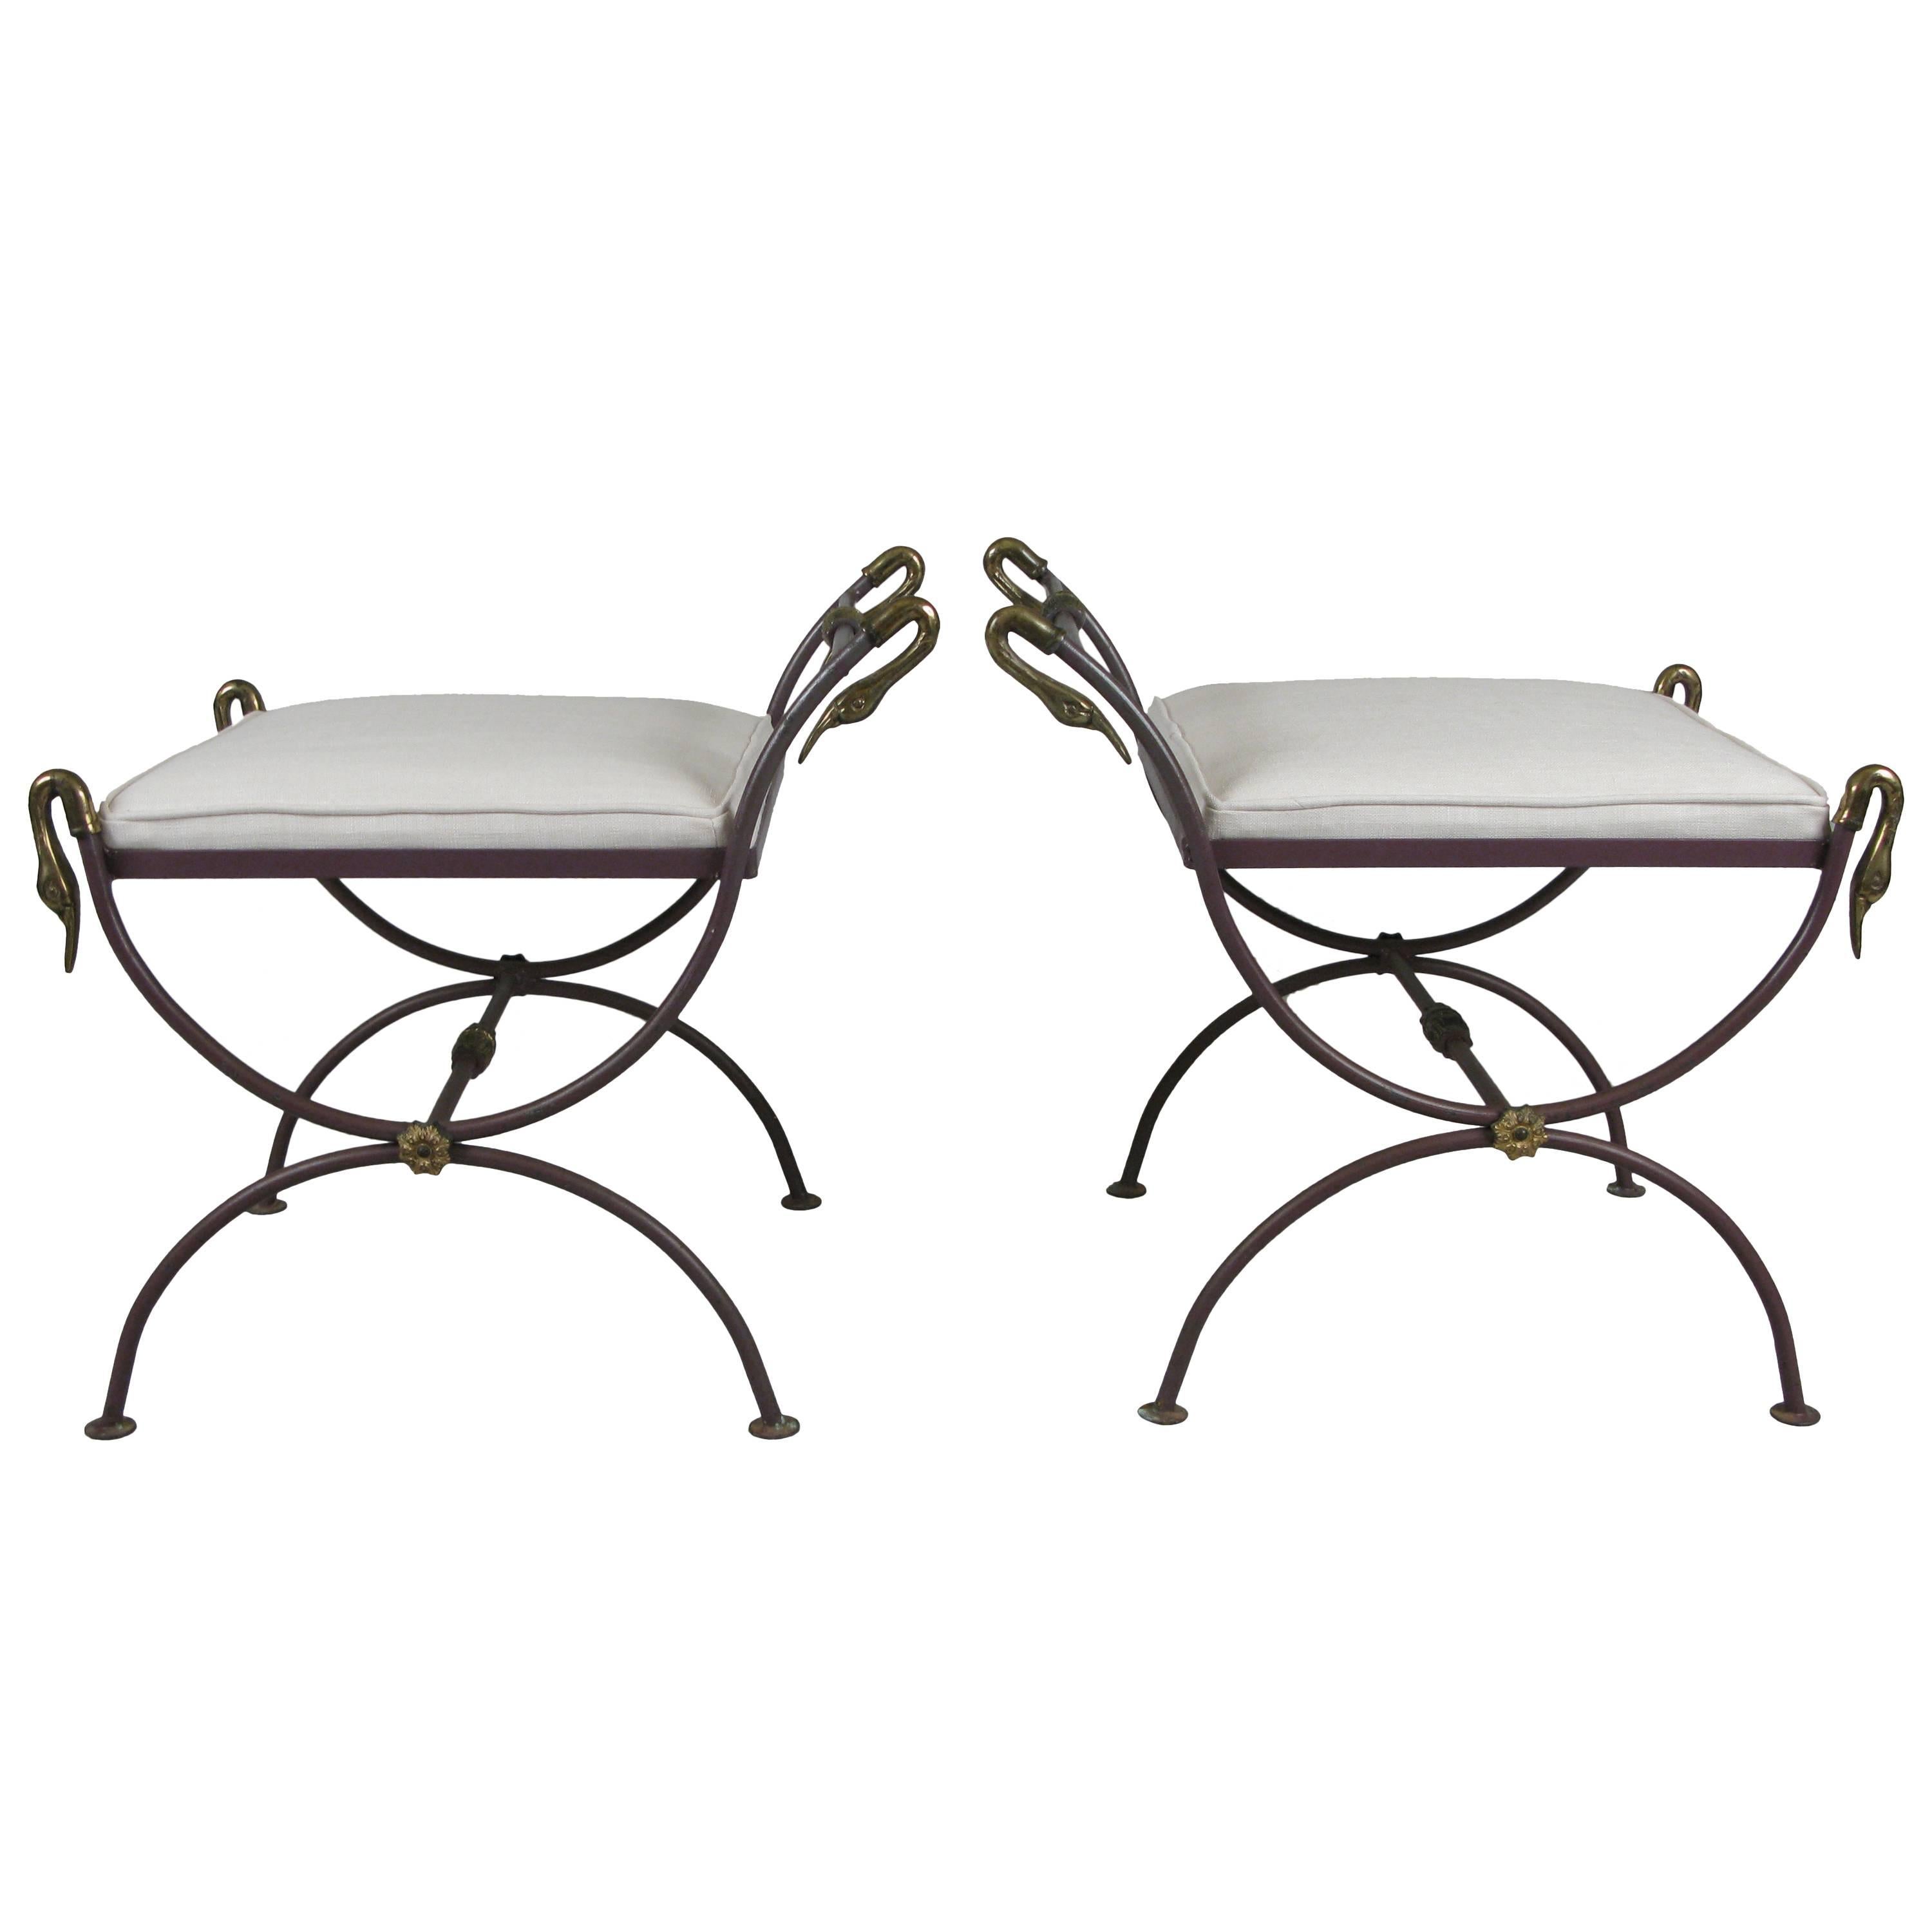 Pair of Neoclassical Iron and Brass Swan Benches